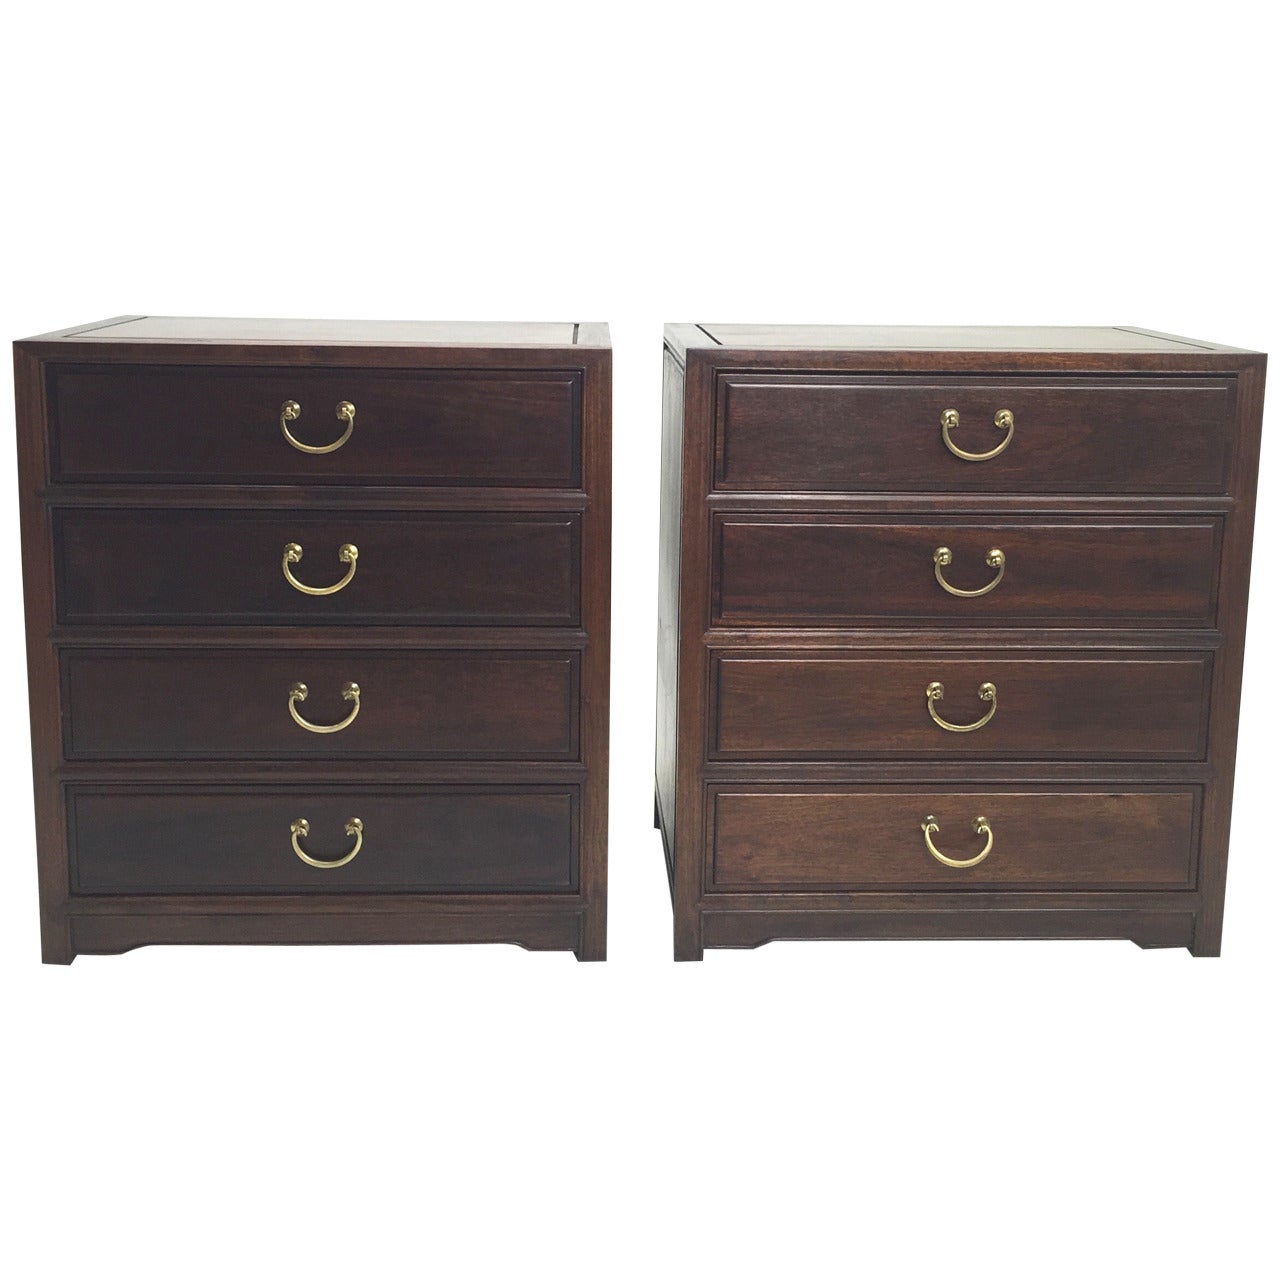 Pair of Asian Rosewood Campaign Style Chests